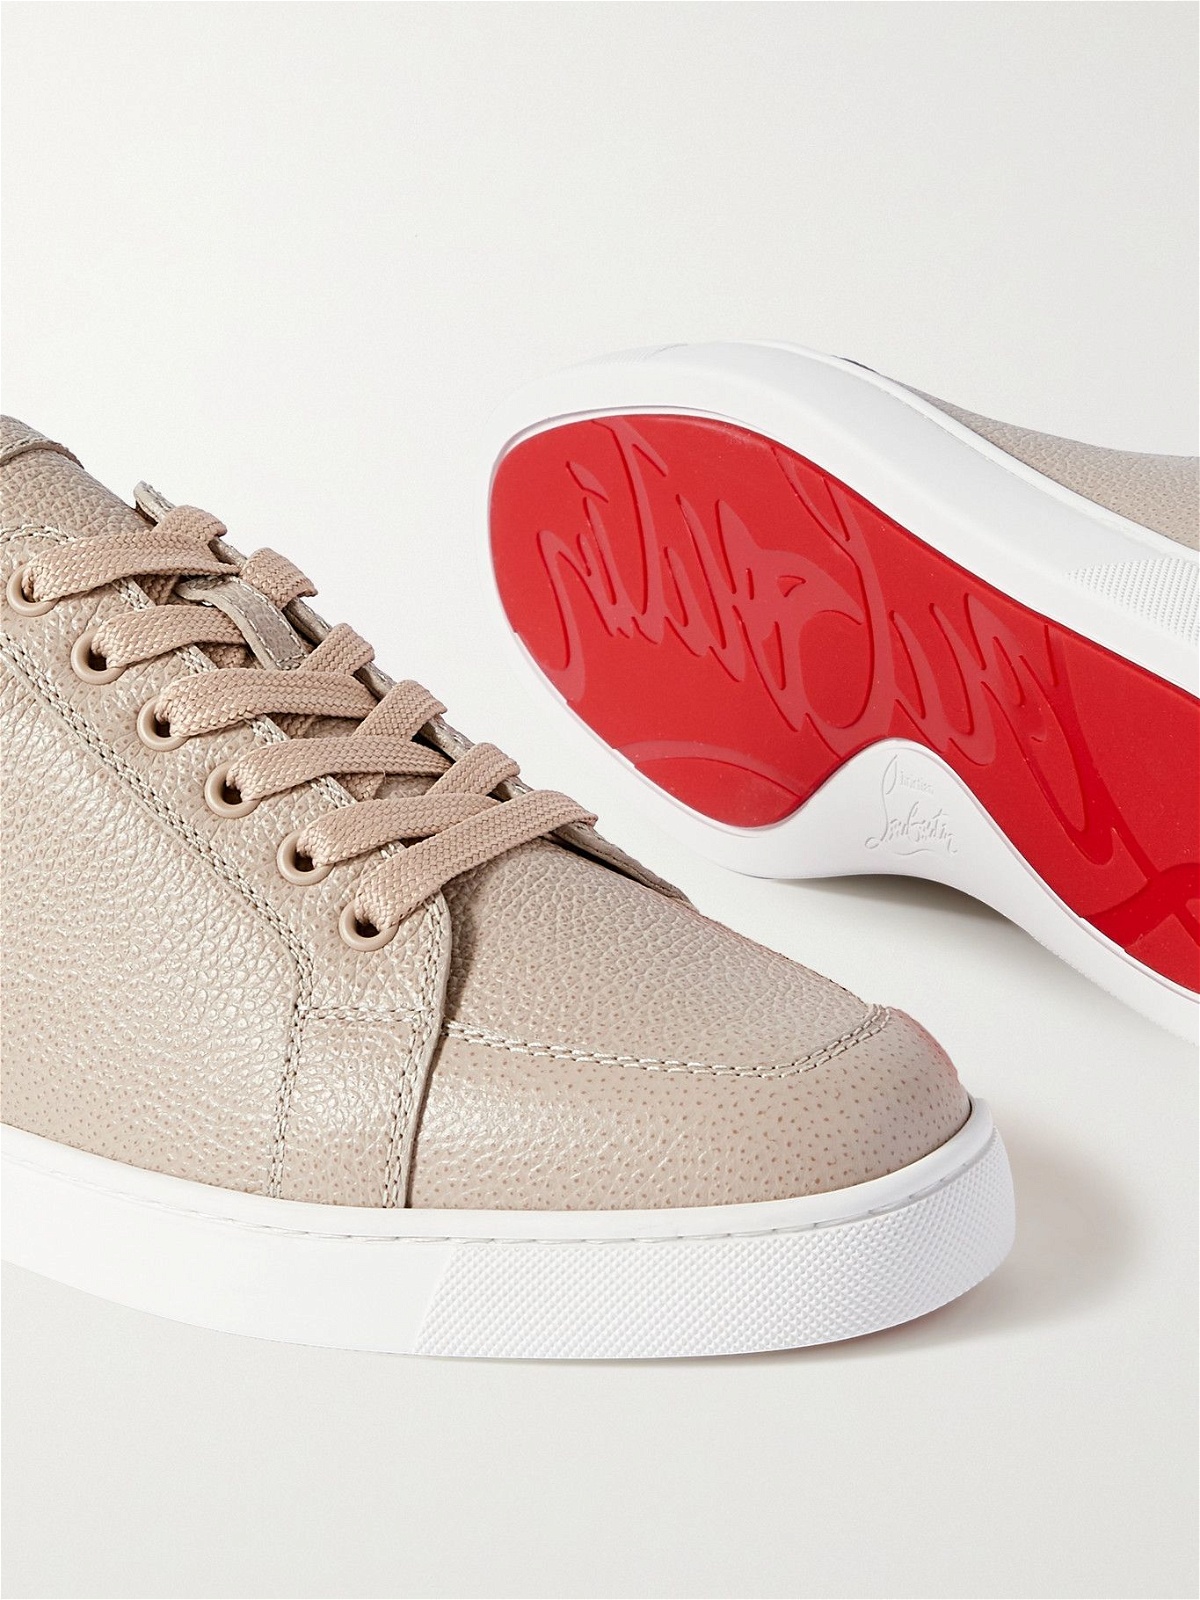 Christian Louboutin Men's Rantulow Red Sole Leather Low-Top